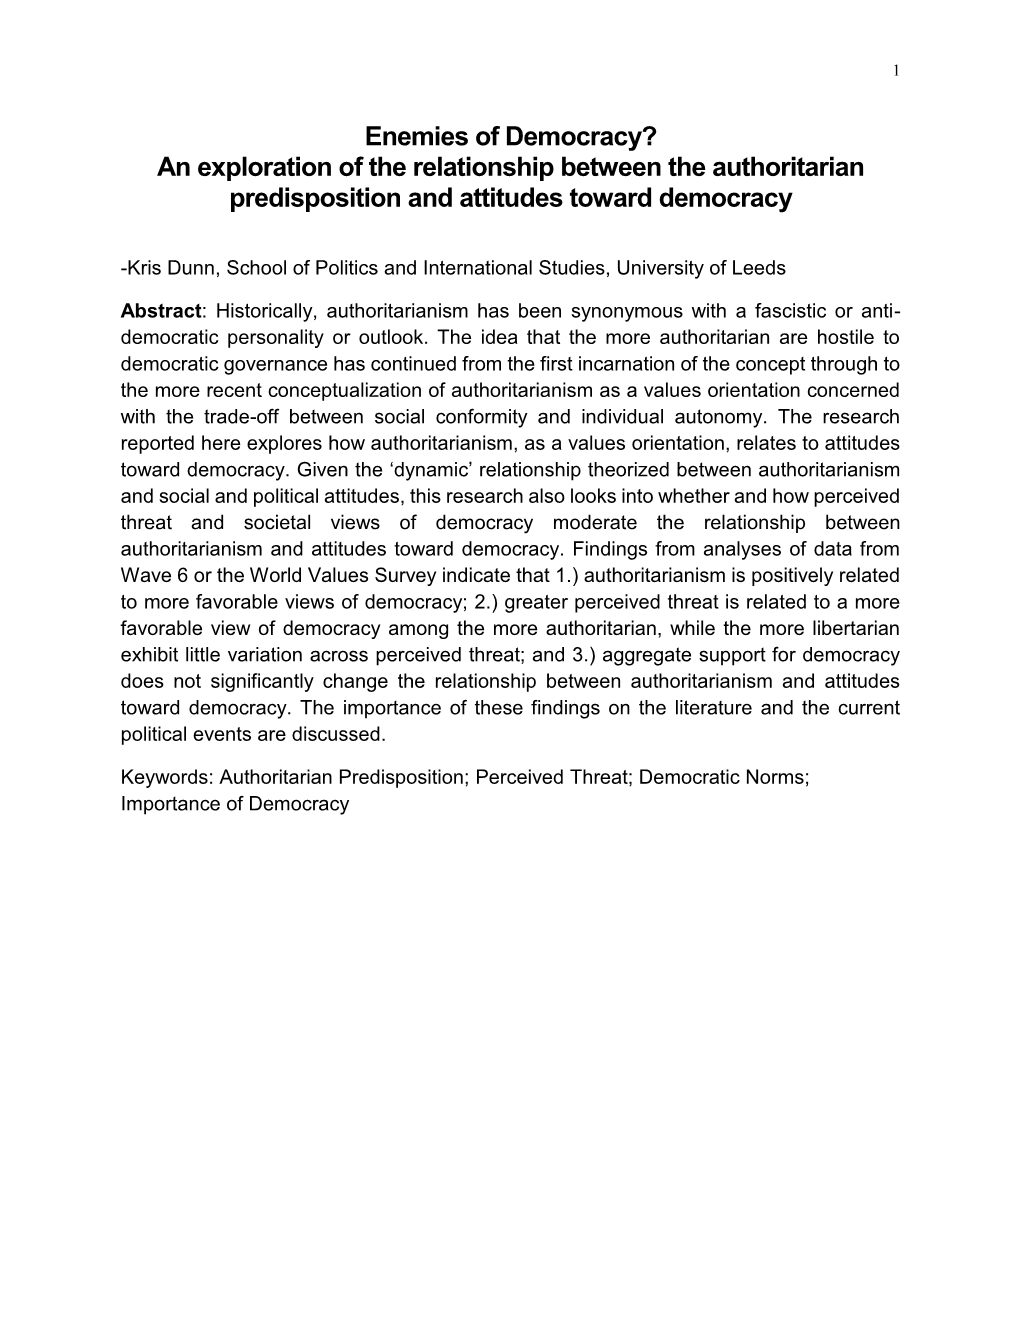 Enemies of Democracy? an Exploration of the Relationship Between the Authoritarian Predisposition and Attitudes Toward Democracy